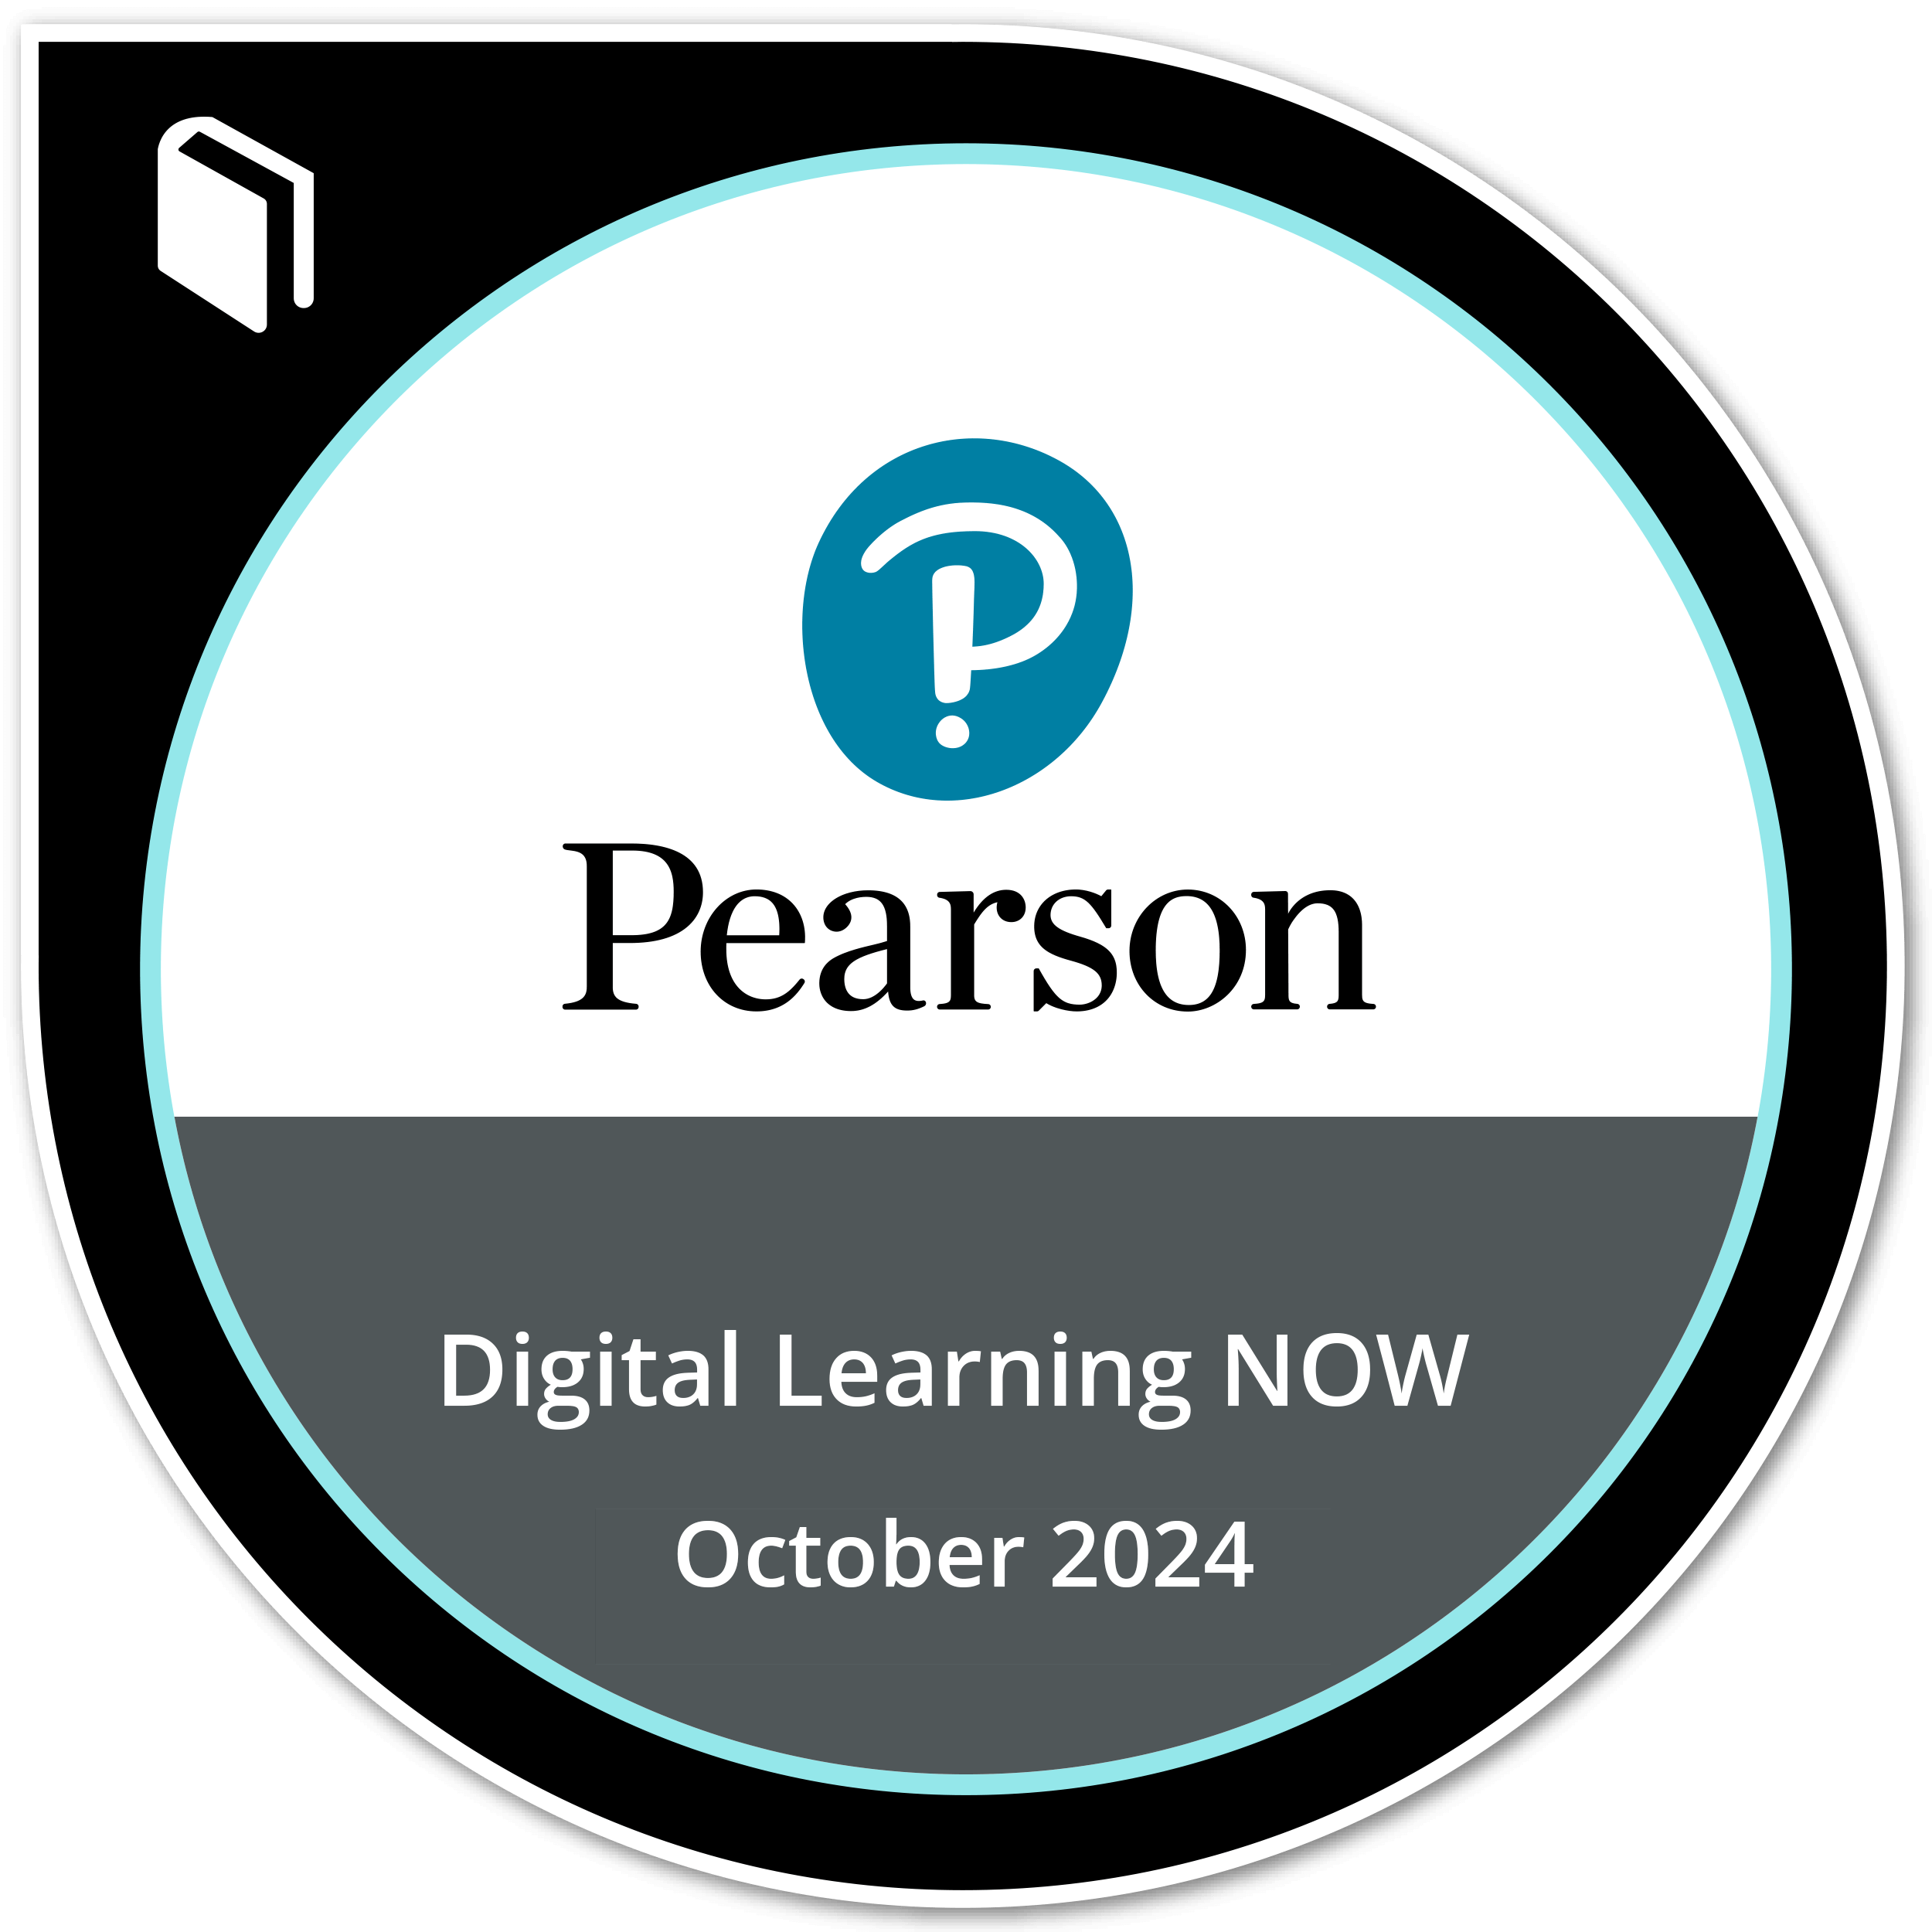 Digital Learning NOW badge